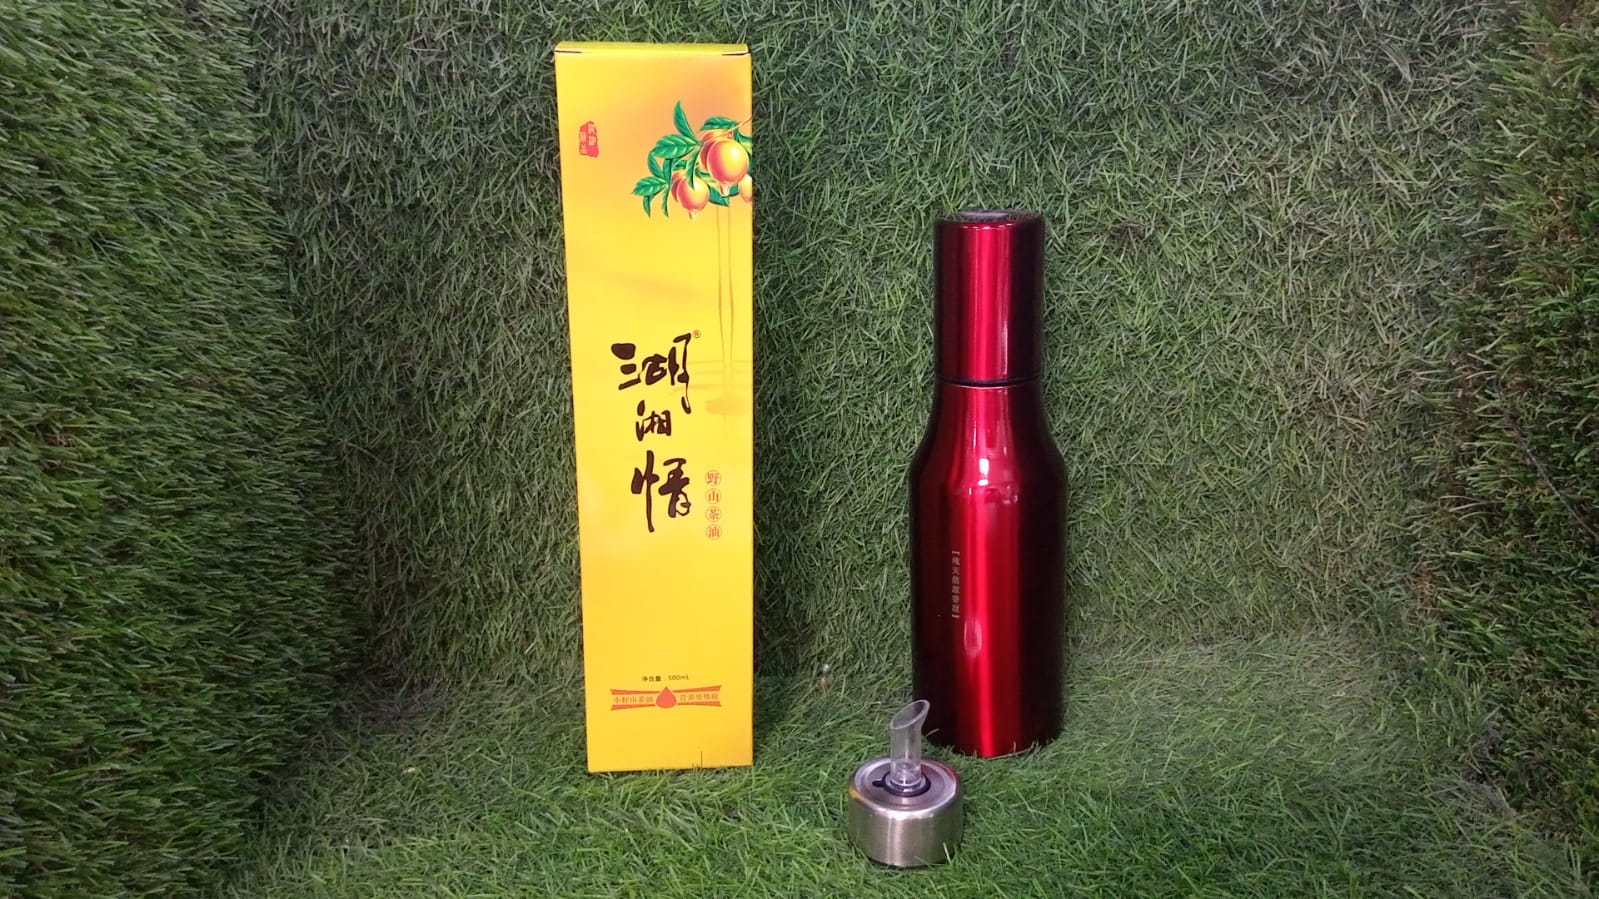 STAINLESS STEEL OIL DISPENSER WITH NOZZLE BOTTLE